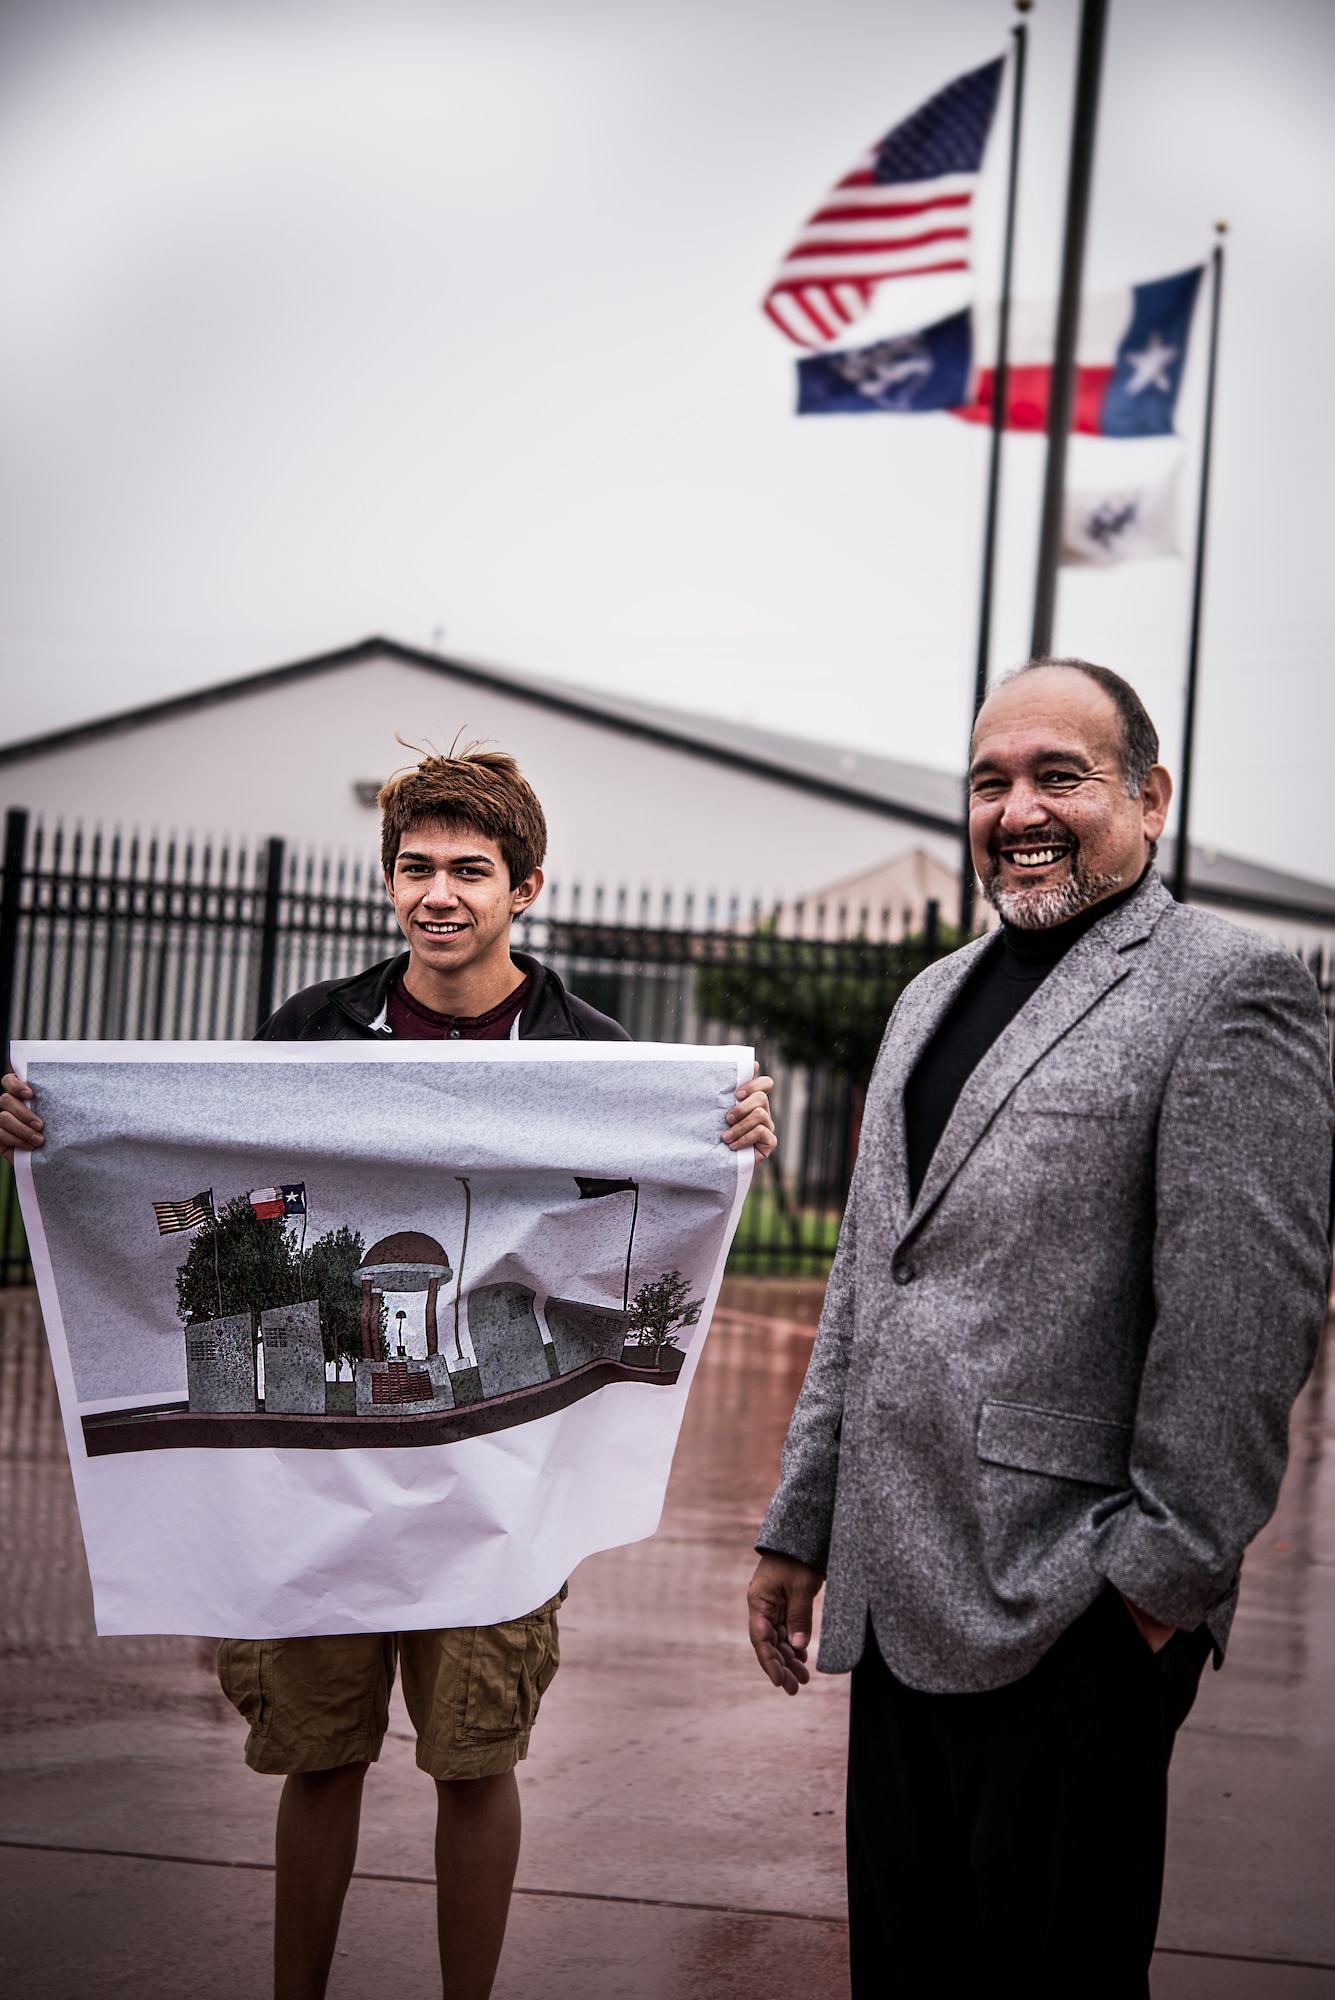 Julio Zamora, a senior at South San Antonio High School, and architect Jorge Flores stand near the site of where the War Heroes Memorial will be built. Zamora holds a transcribed illustration of his design, Nov. 6, 2014, which was created in a program used by professional architects to manipulate various architectural symbols. The memorial is meant to commemorate native San Antonio veterans, from across the military services, who have lost their lives serving their country. (U.S. Air Force photo illustration by 1st Lt. Jose R. Davis)